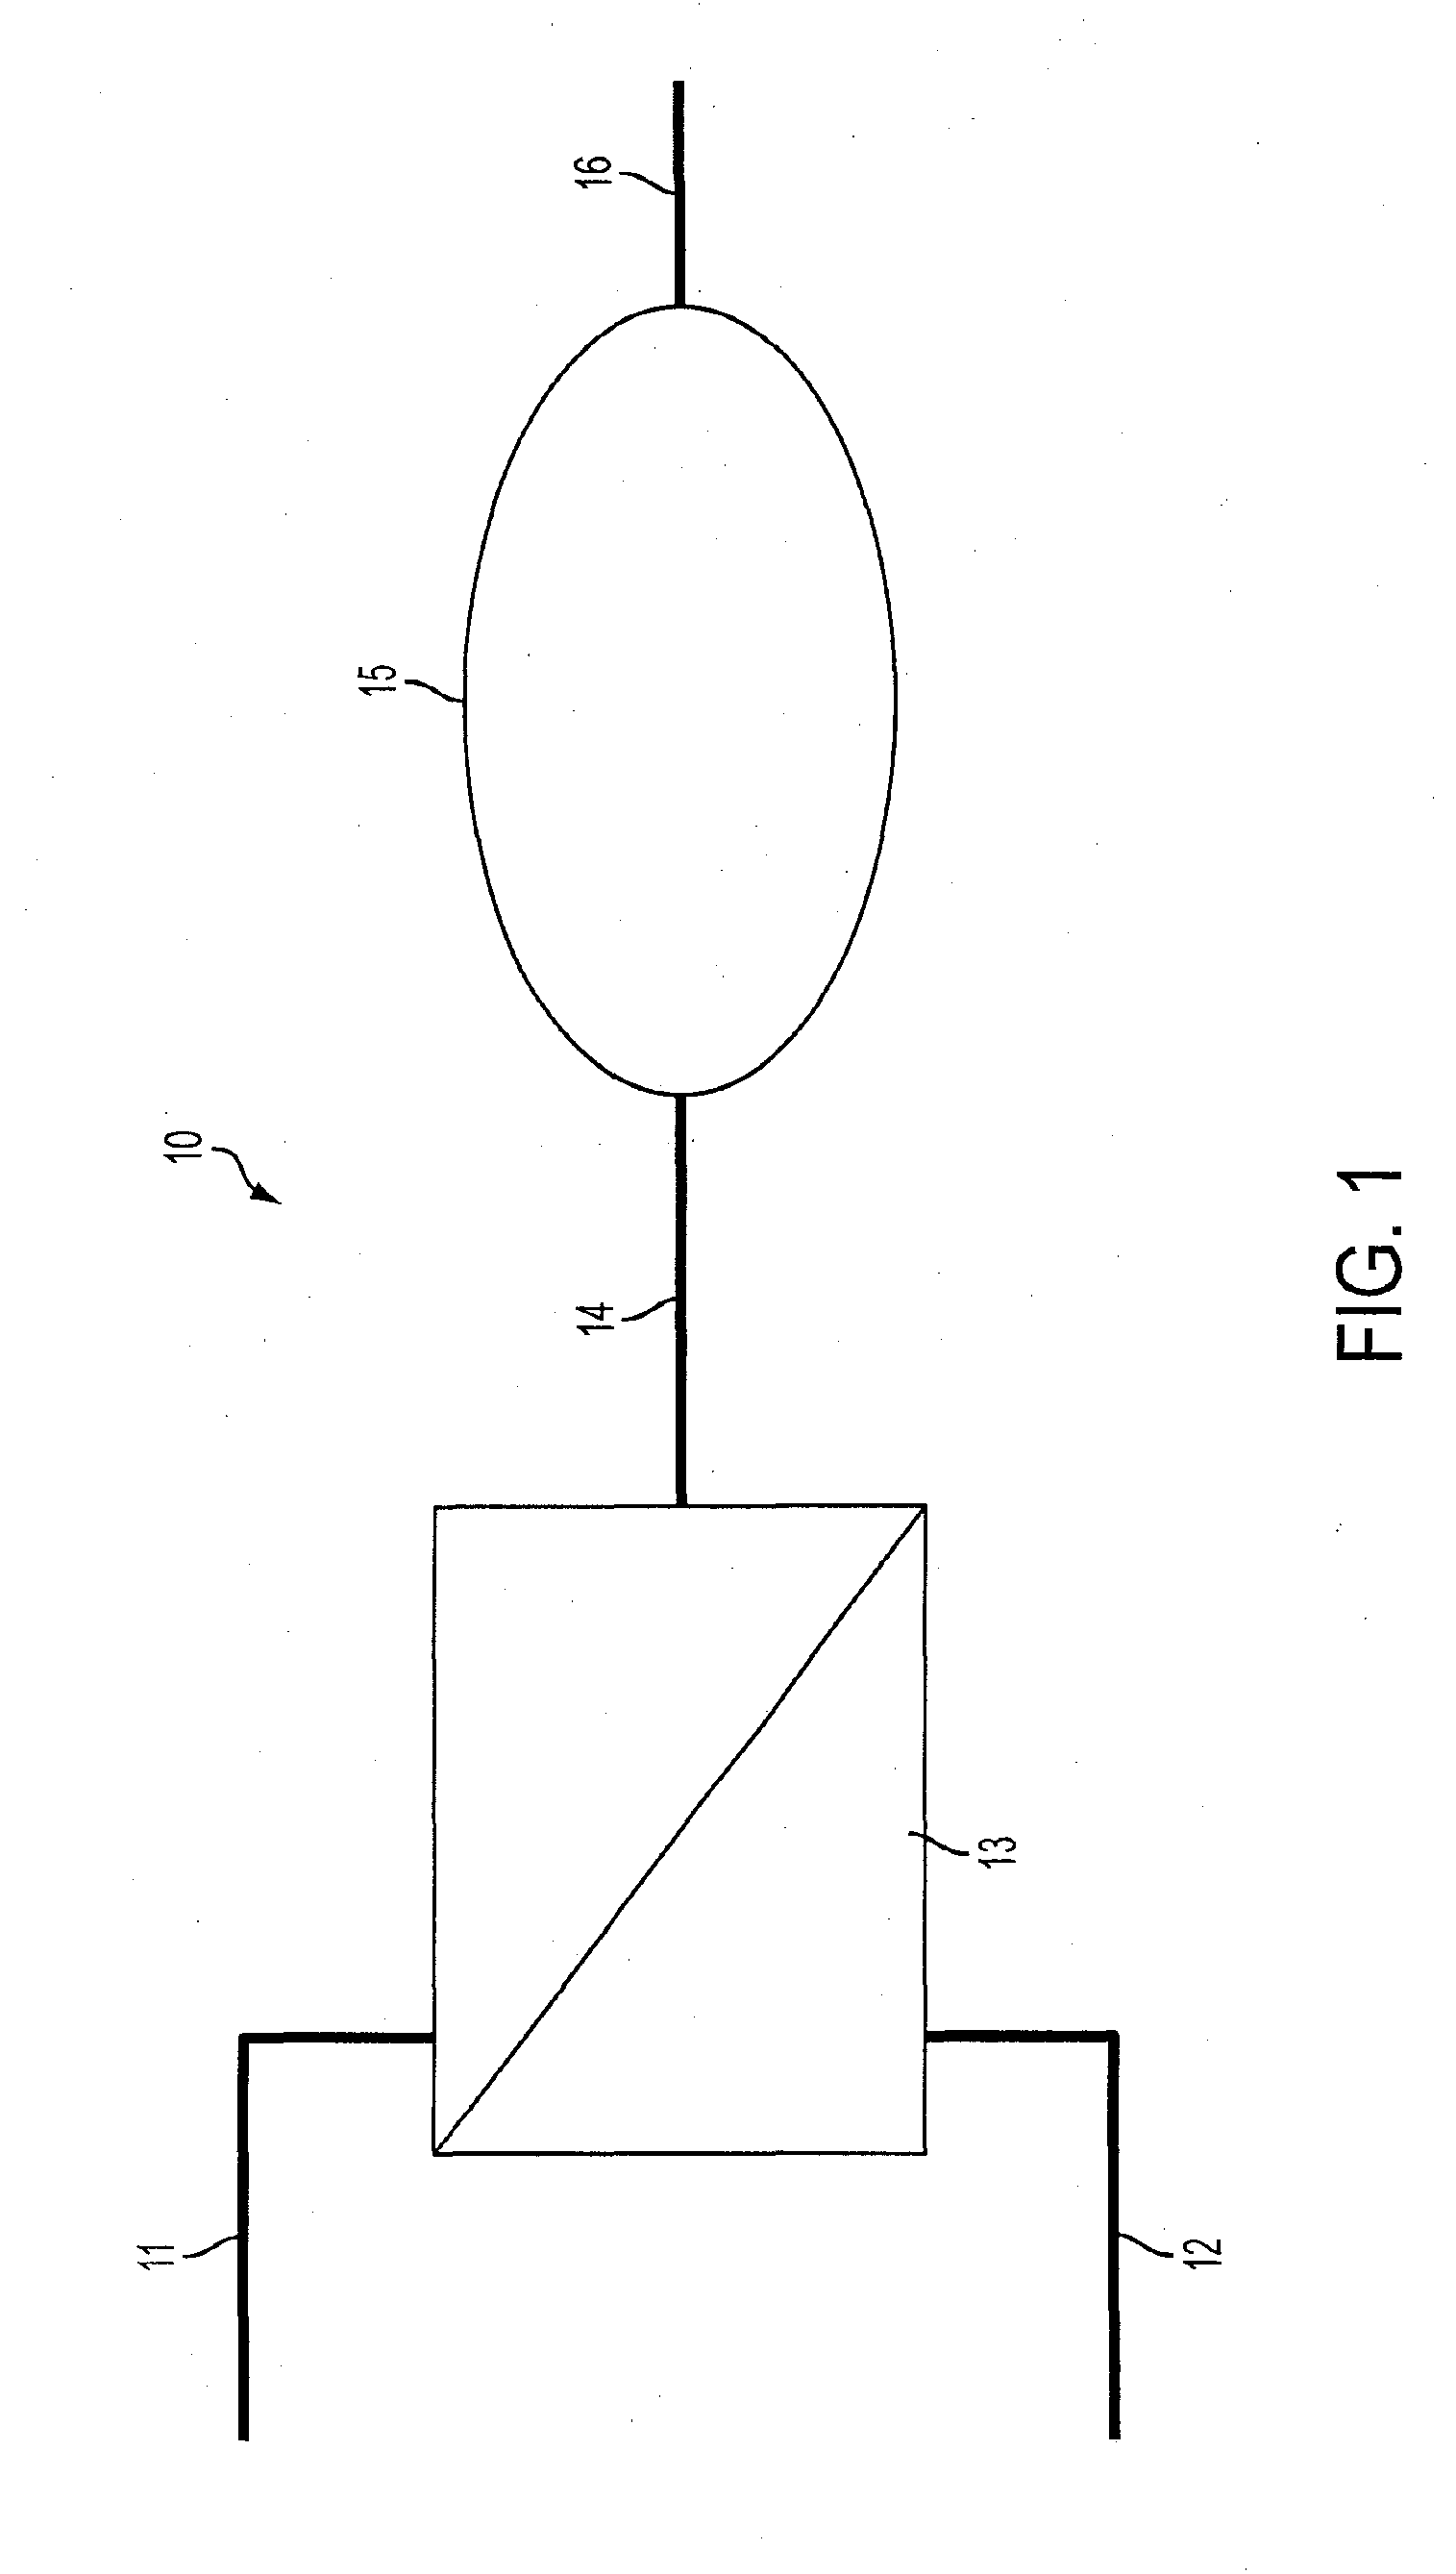 Solenoid air/oxygen system for use with an adaptive oxygen controller and therapeutic methods of use